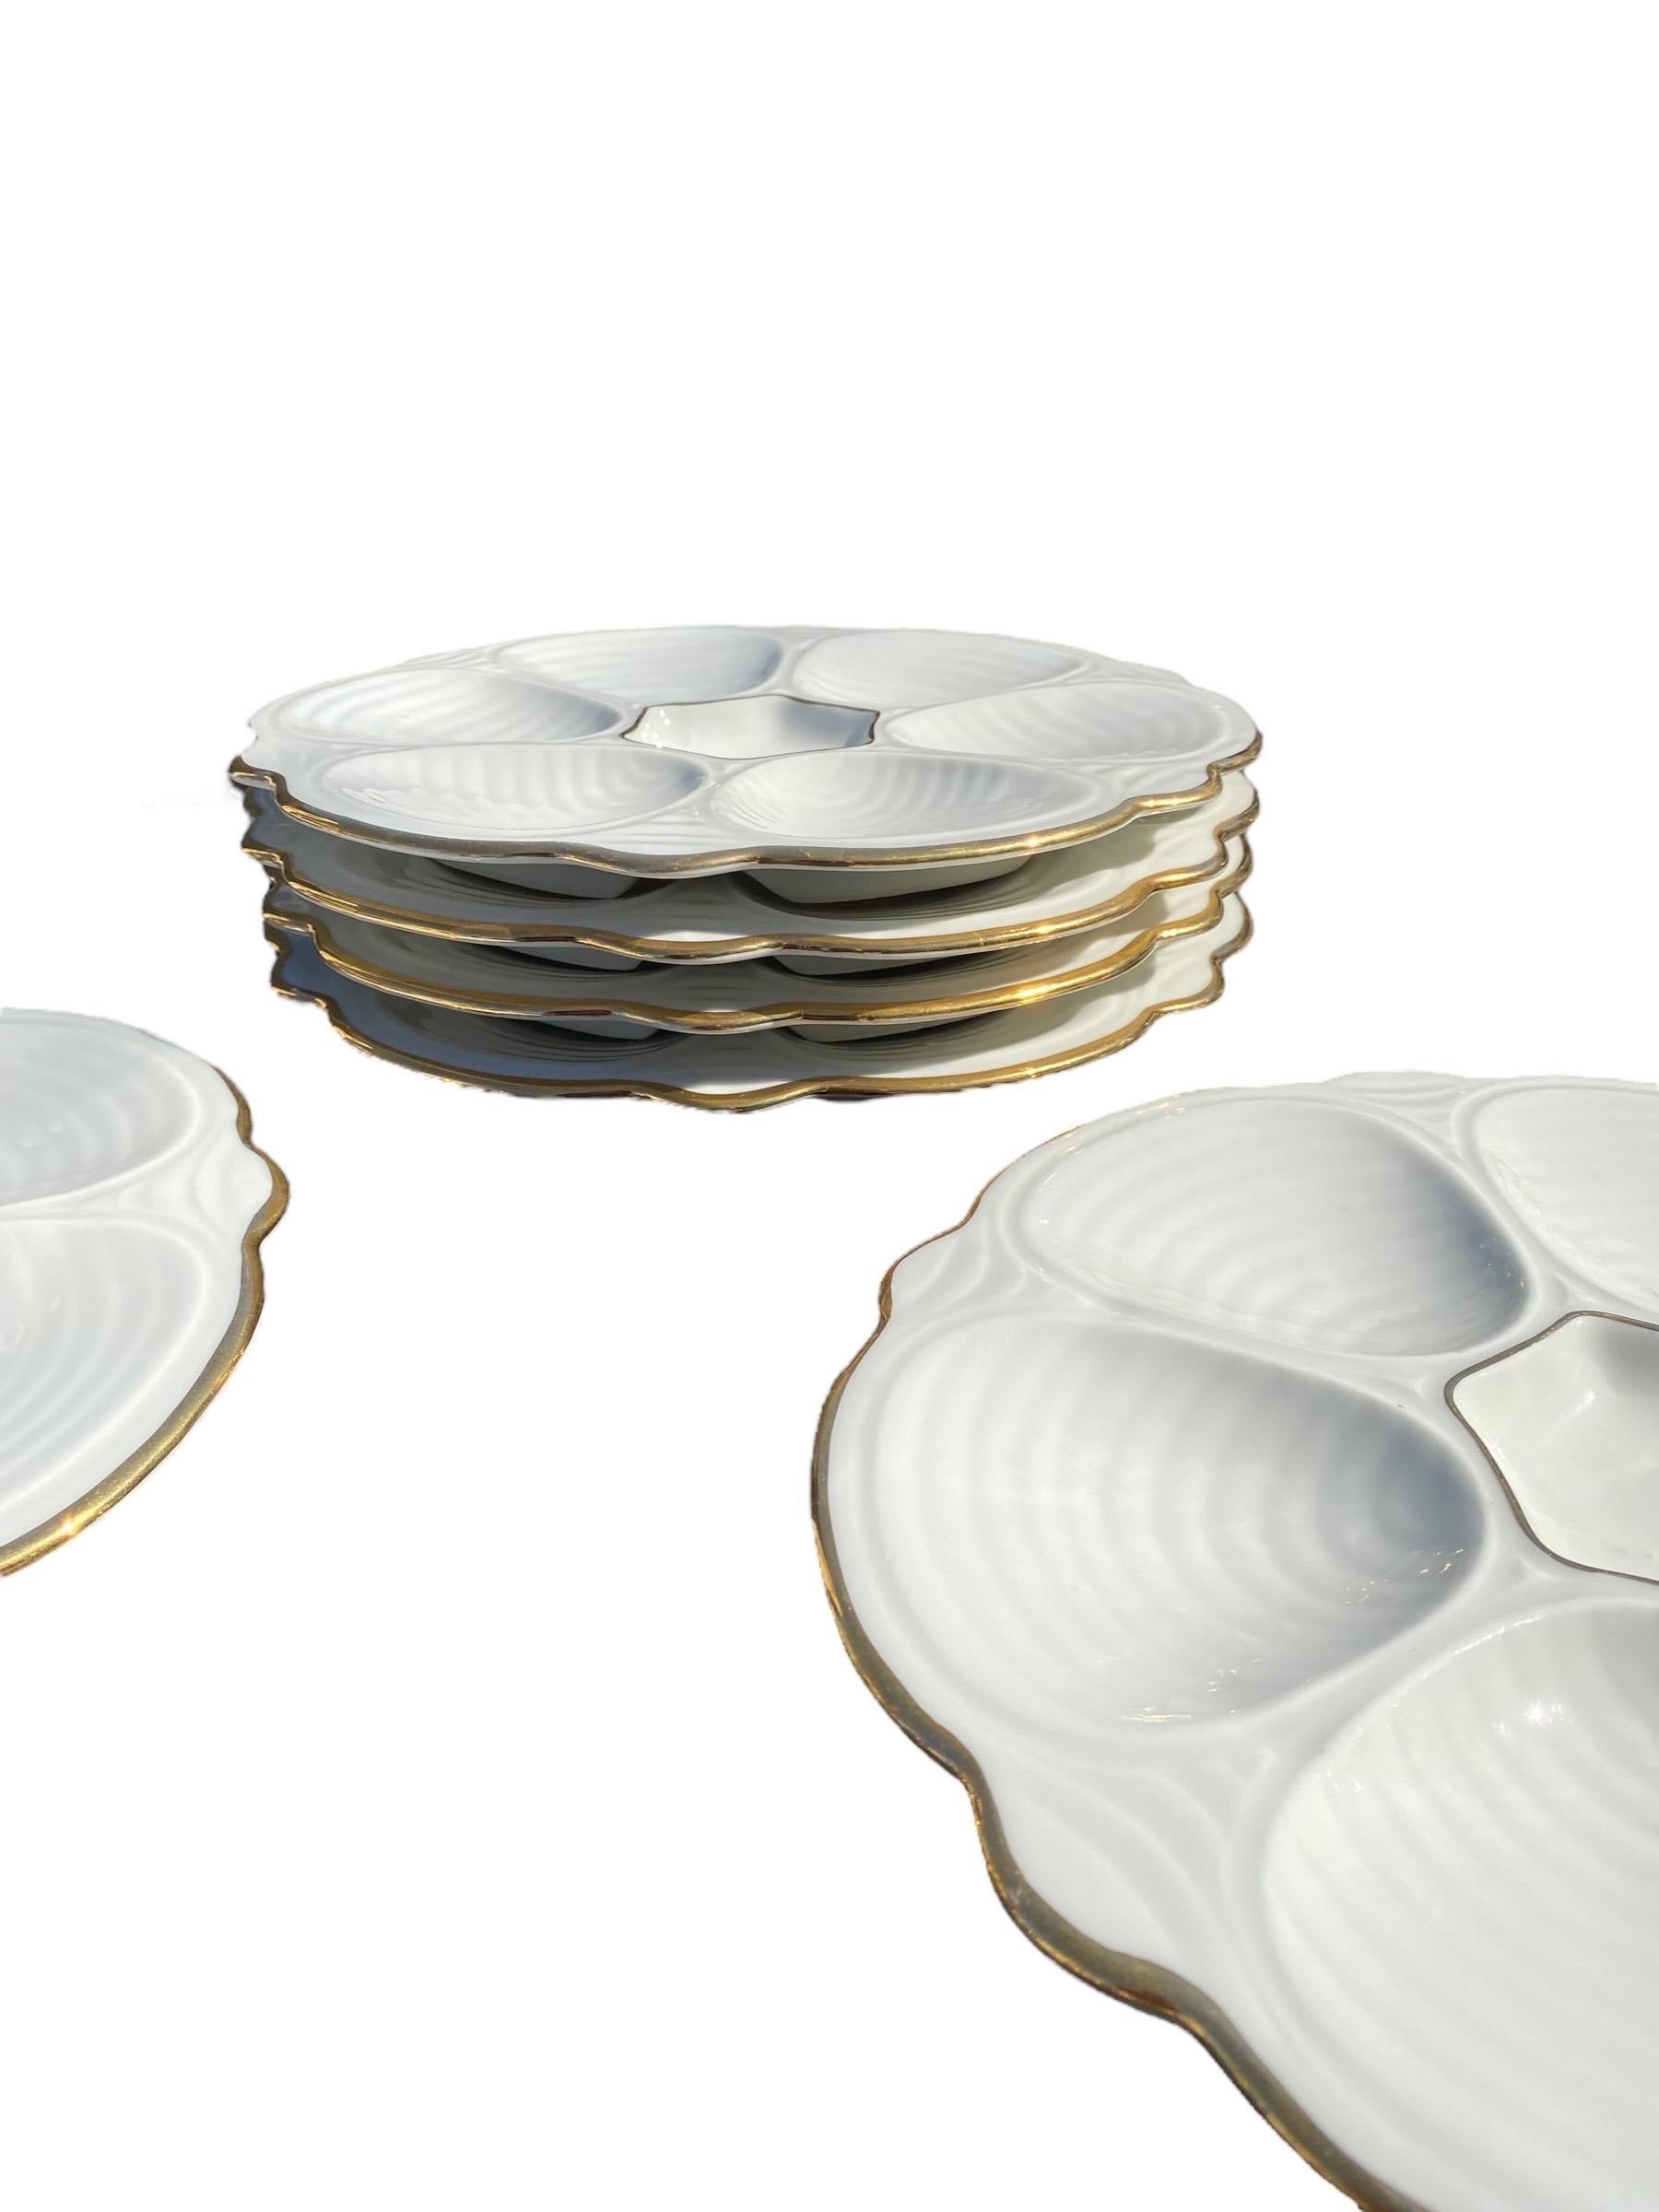 A set of six vintage French white with gold oyster plates from a charming French restaurant, Au Cadet De Gascogne in Montmartre, Paris, France. Elegant yet understated, they set a chic French table for your next gathering of friends and family. They